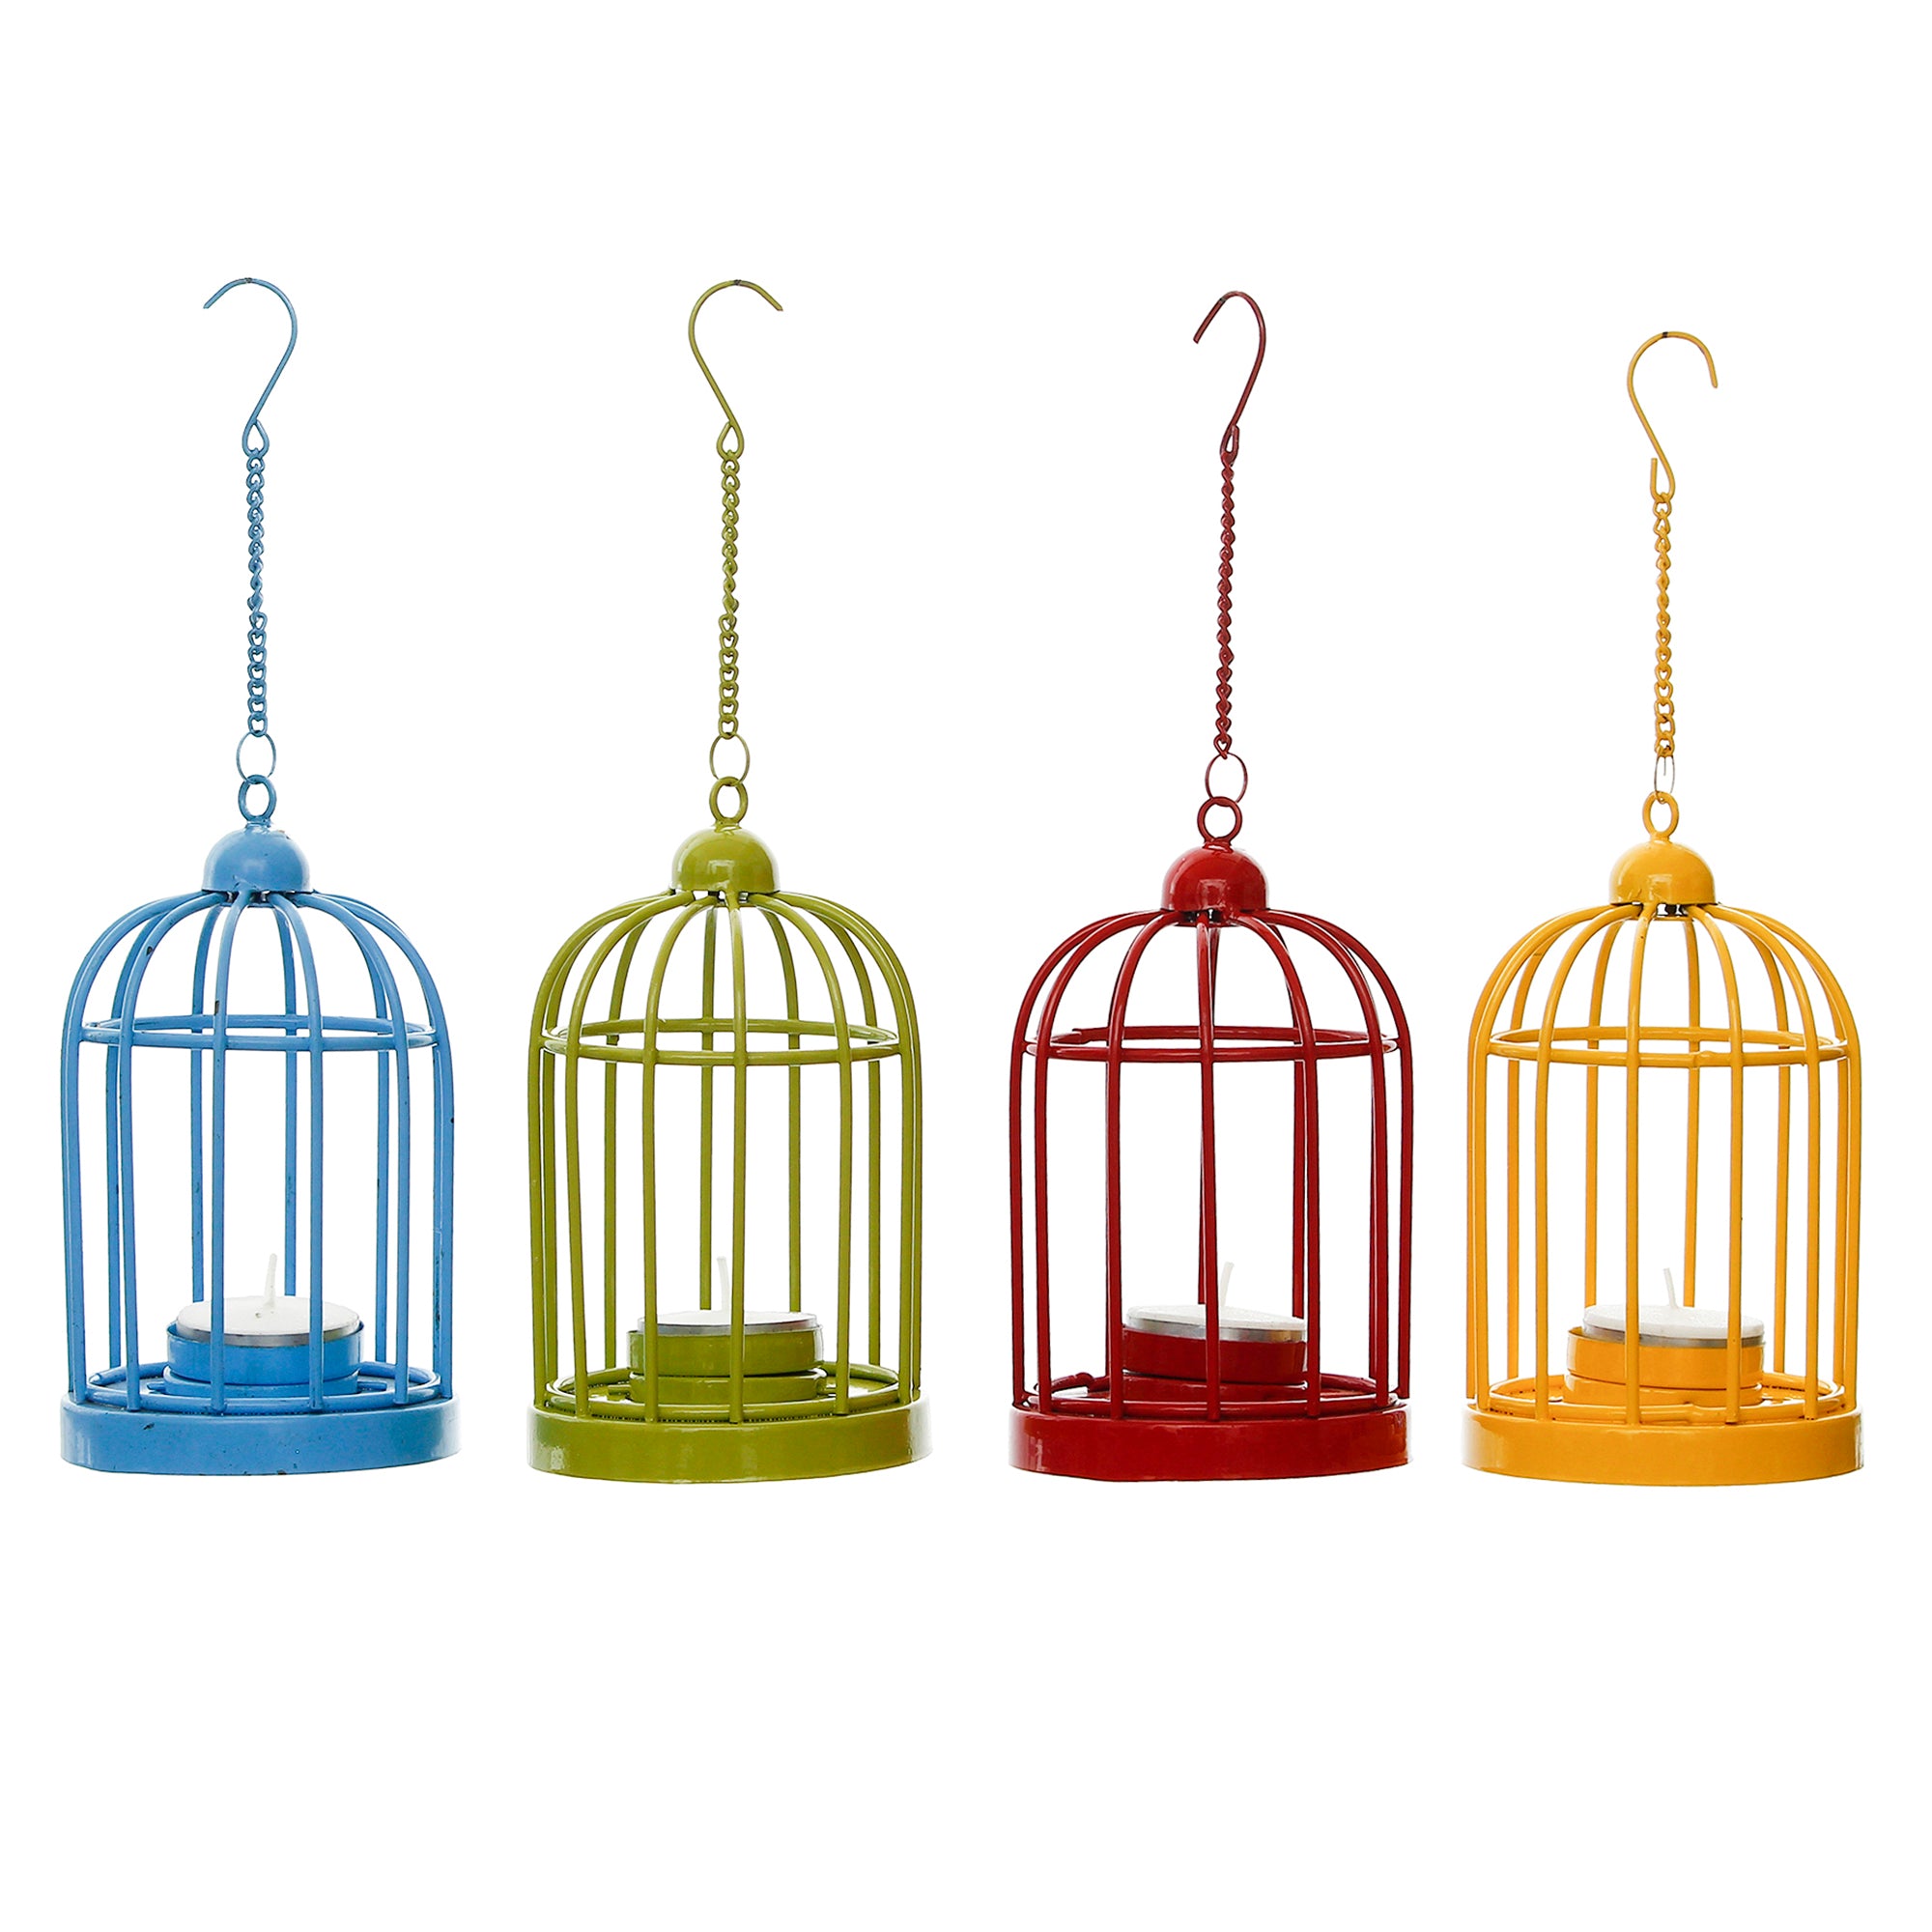 Set of 4 Colors Iron Cage Tea Light candle Holder With Hanging Chain(Blue, Green, Yellow, Red) 5